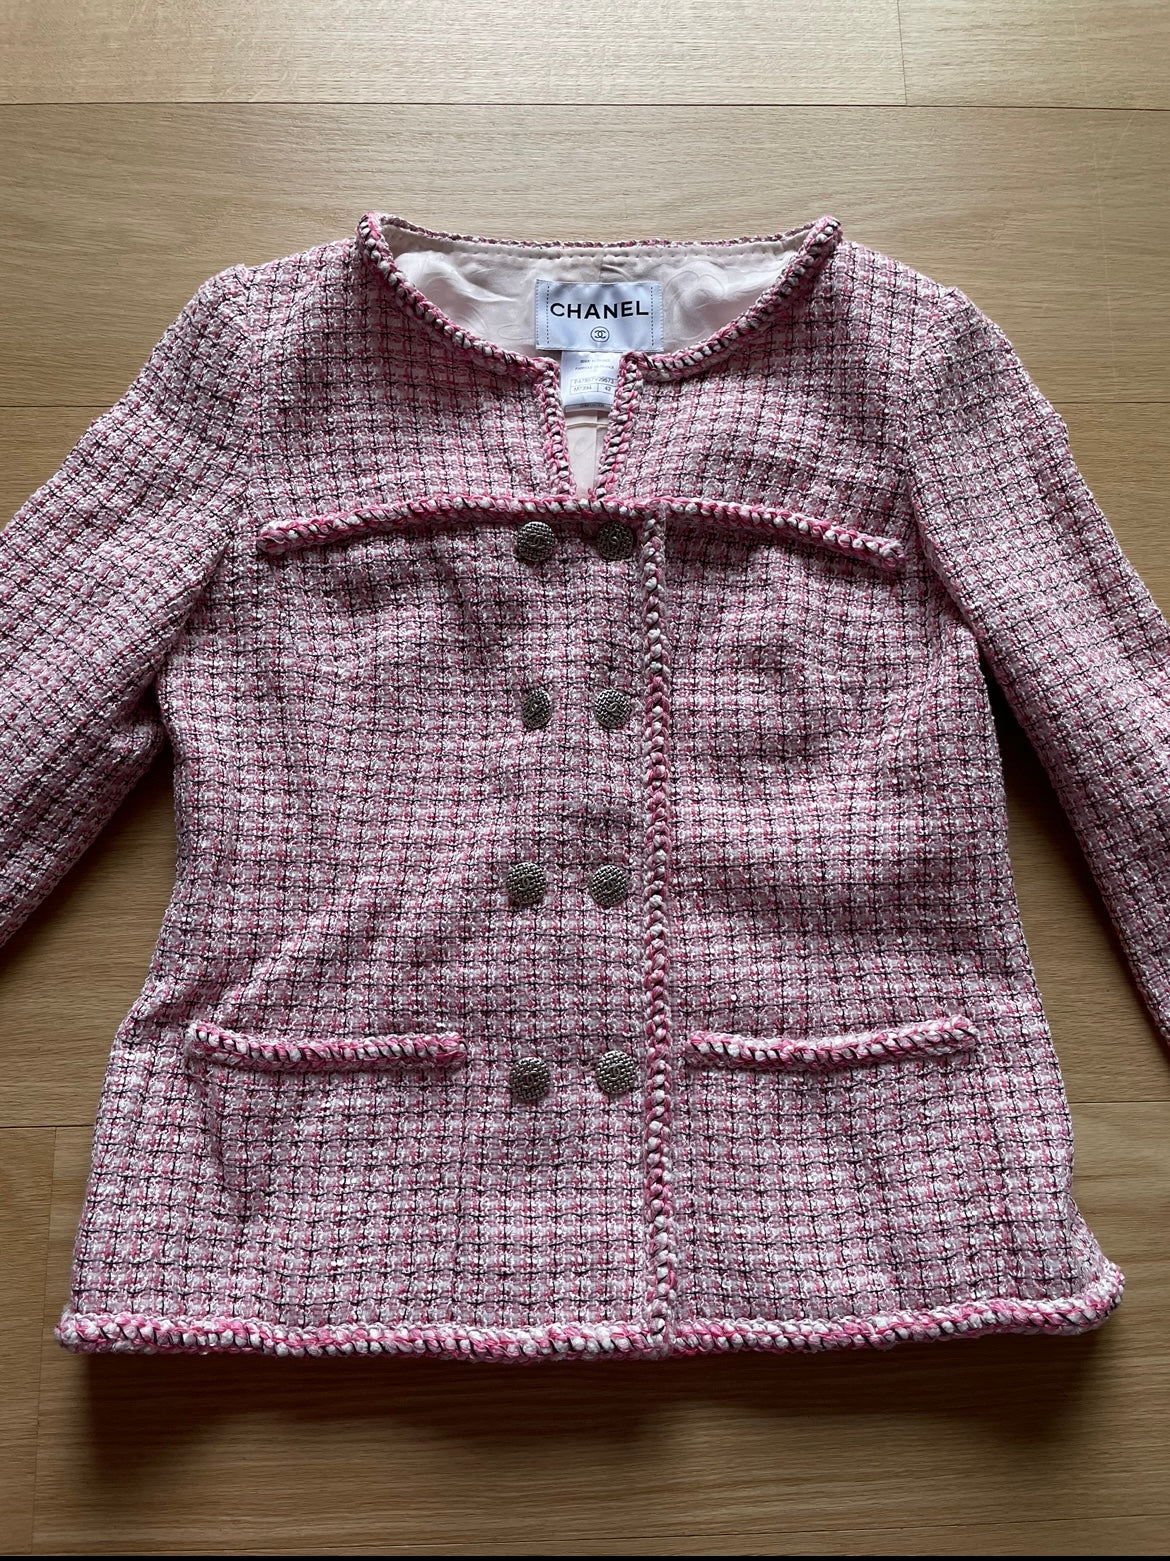 Chanel Pink Tweed Jacket in Size 42 FR